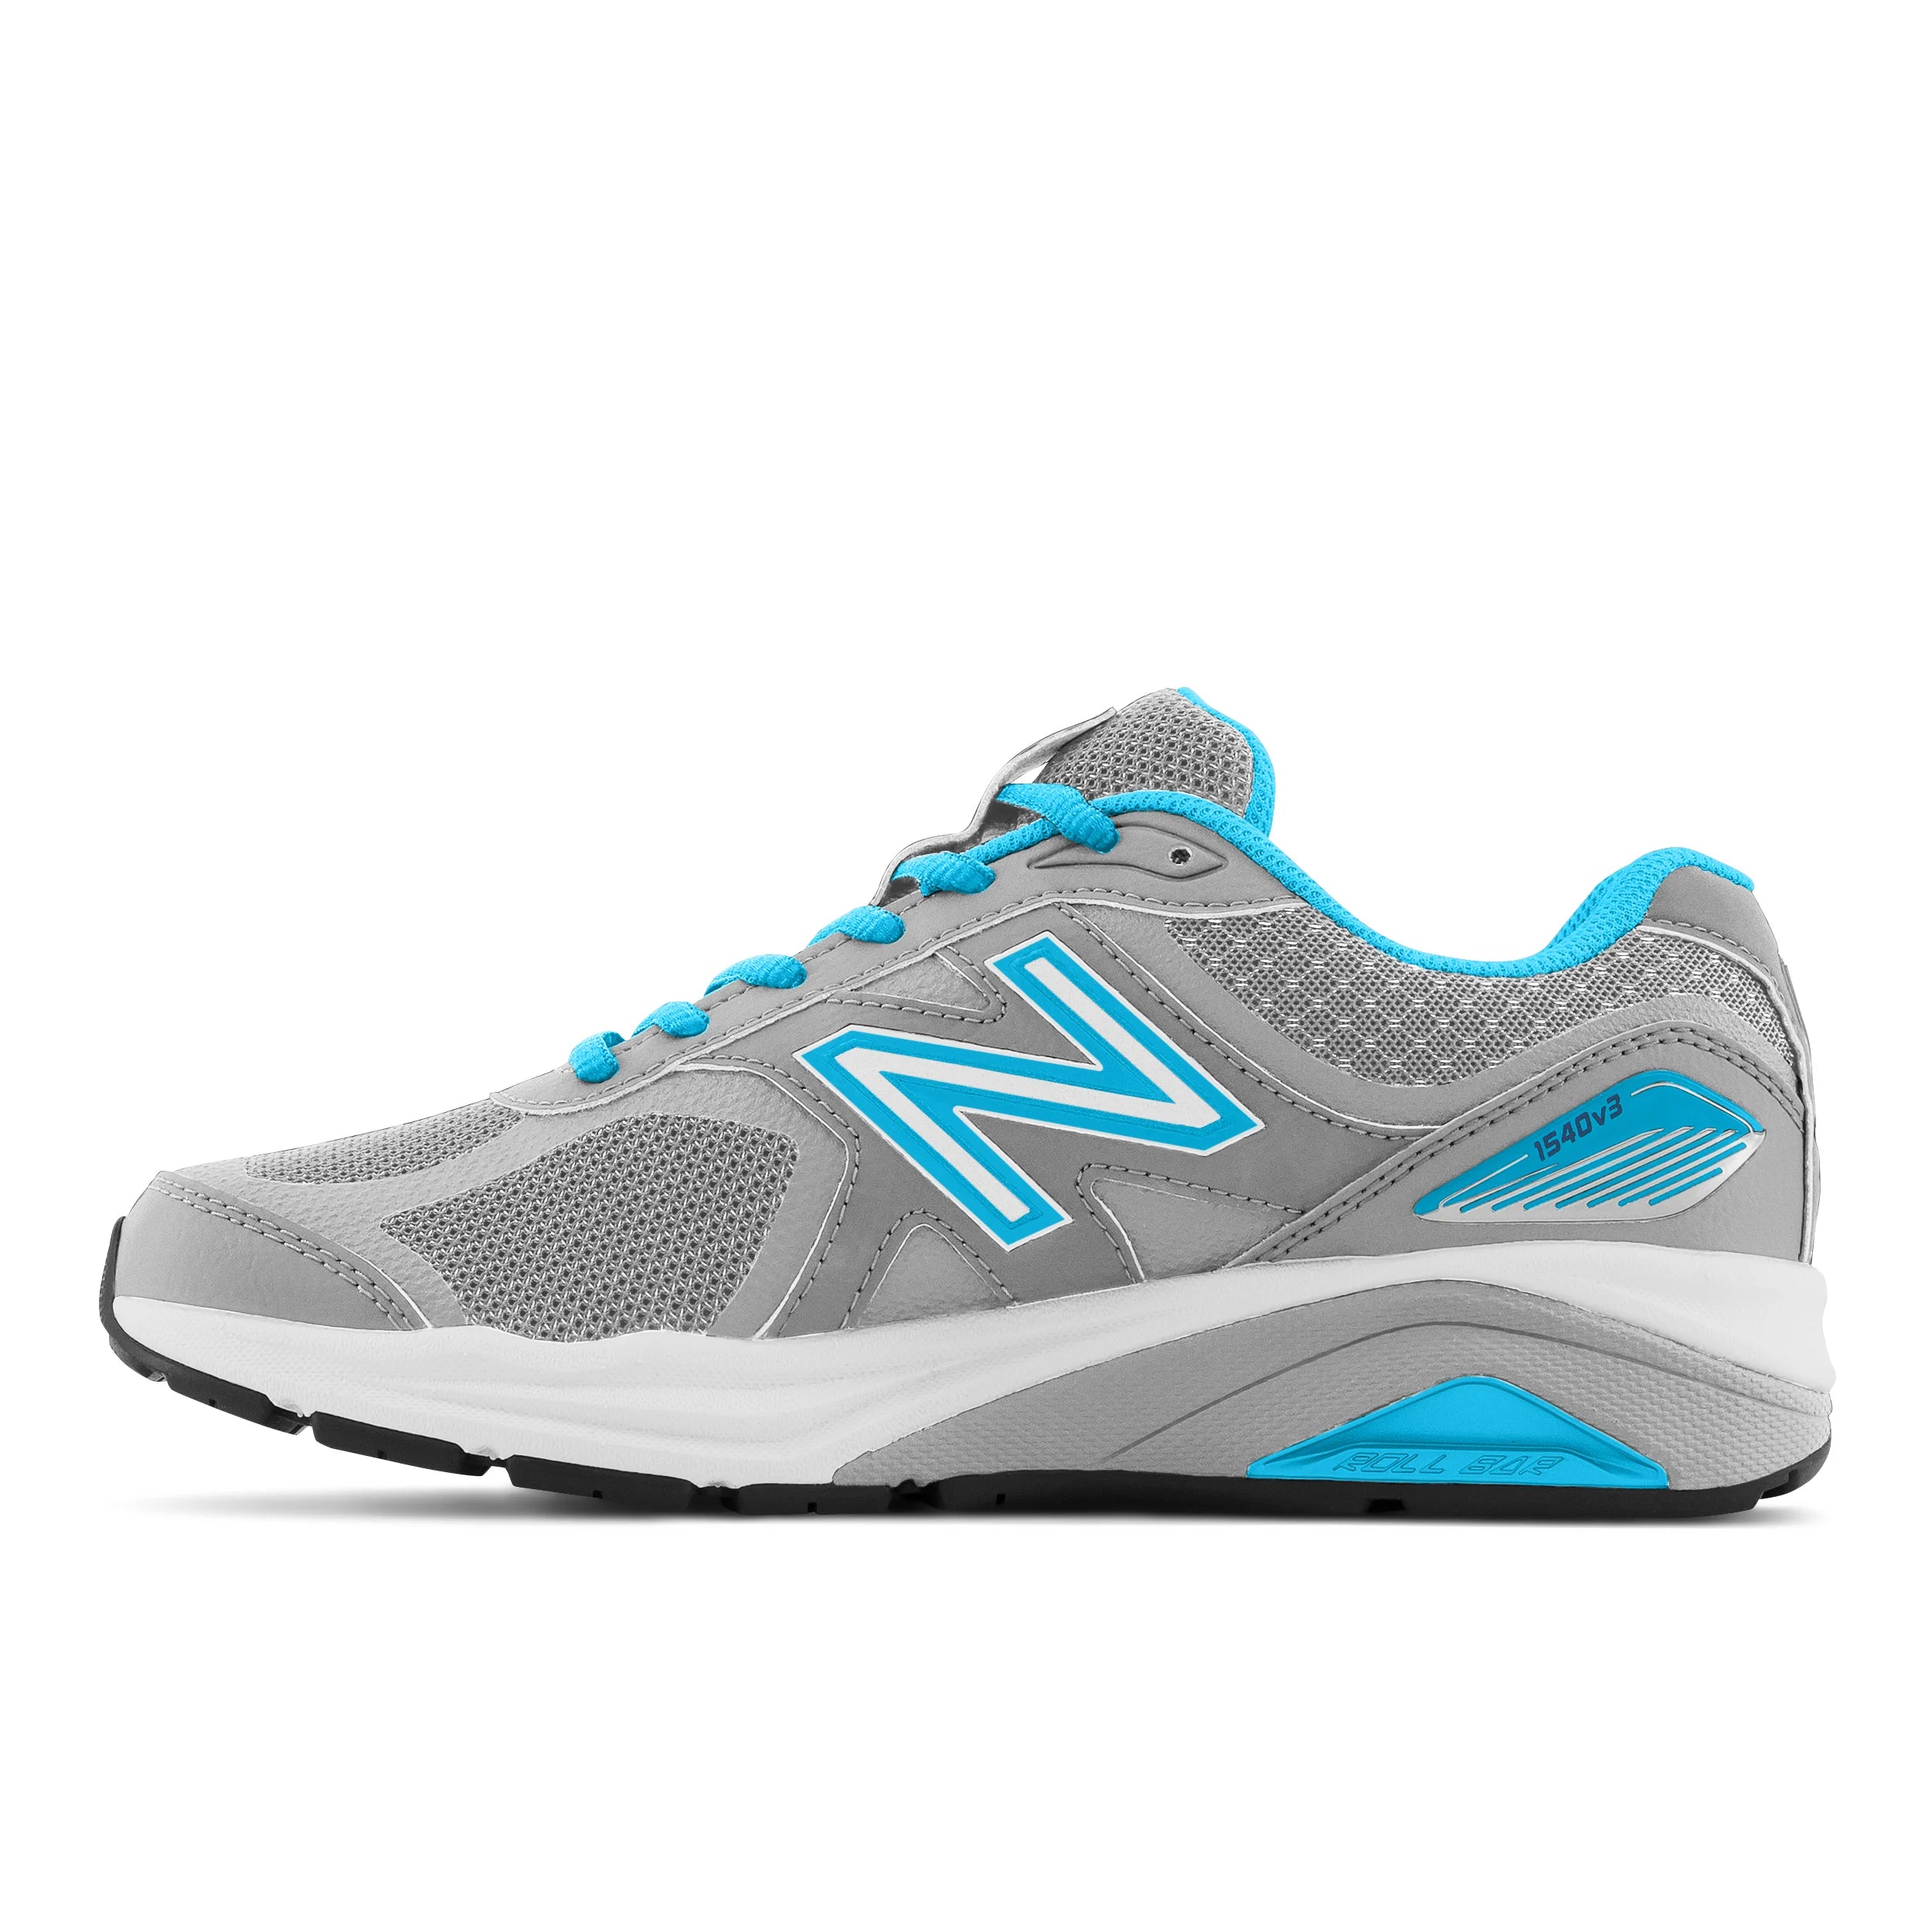 New Balance Women's 1540v3 Running Shoes in SILVER